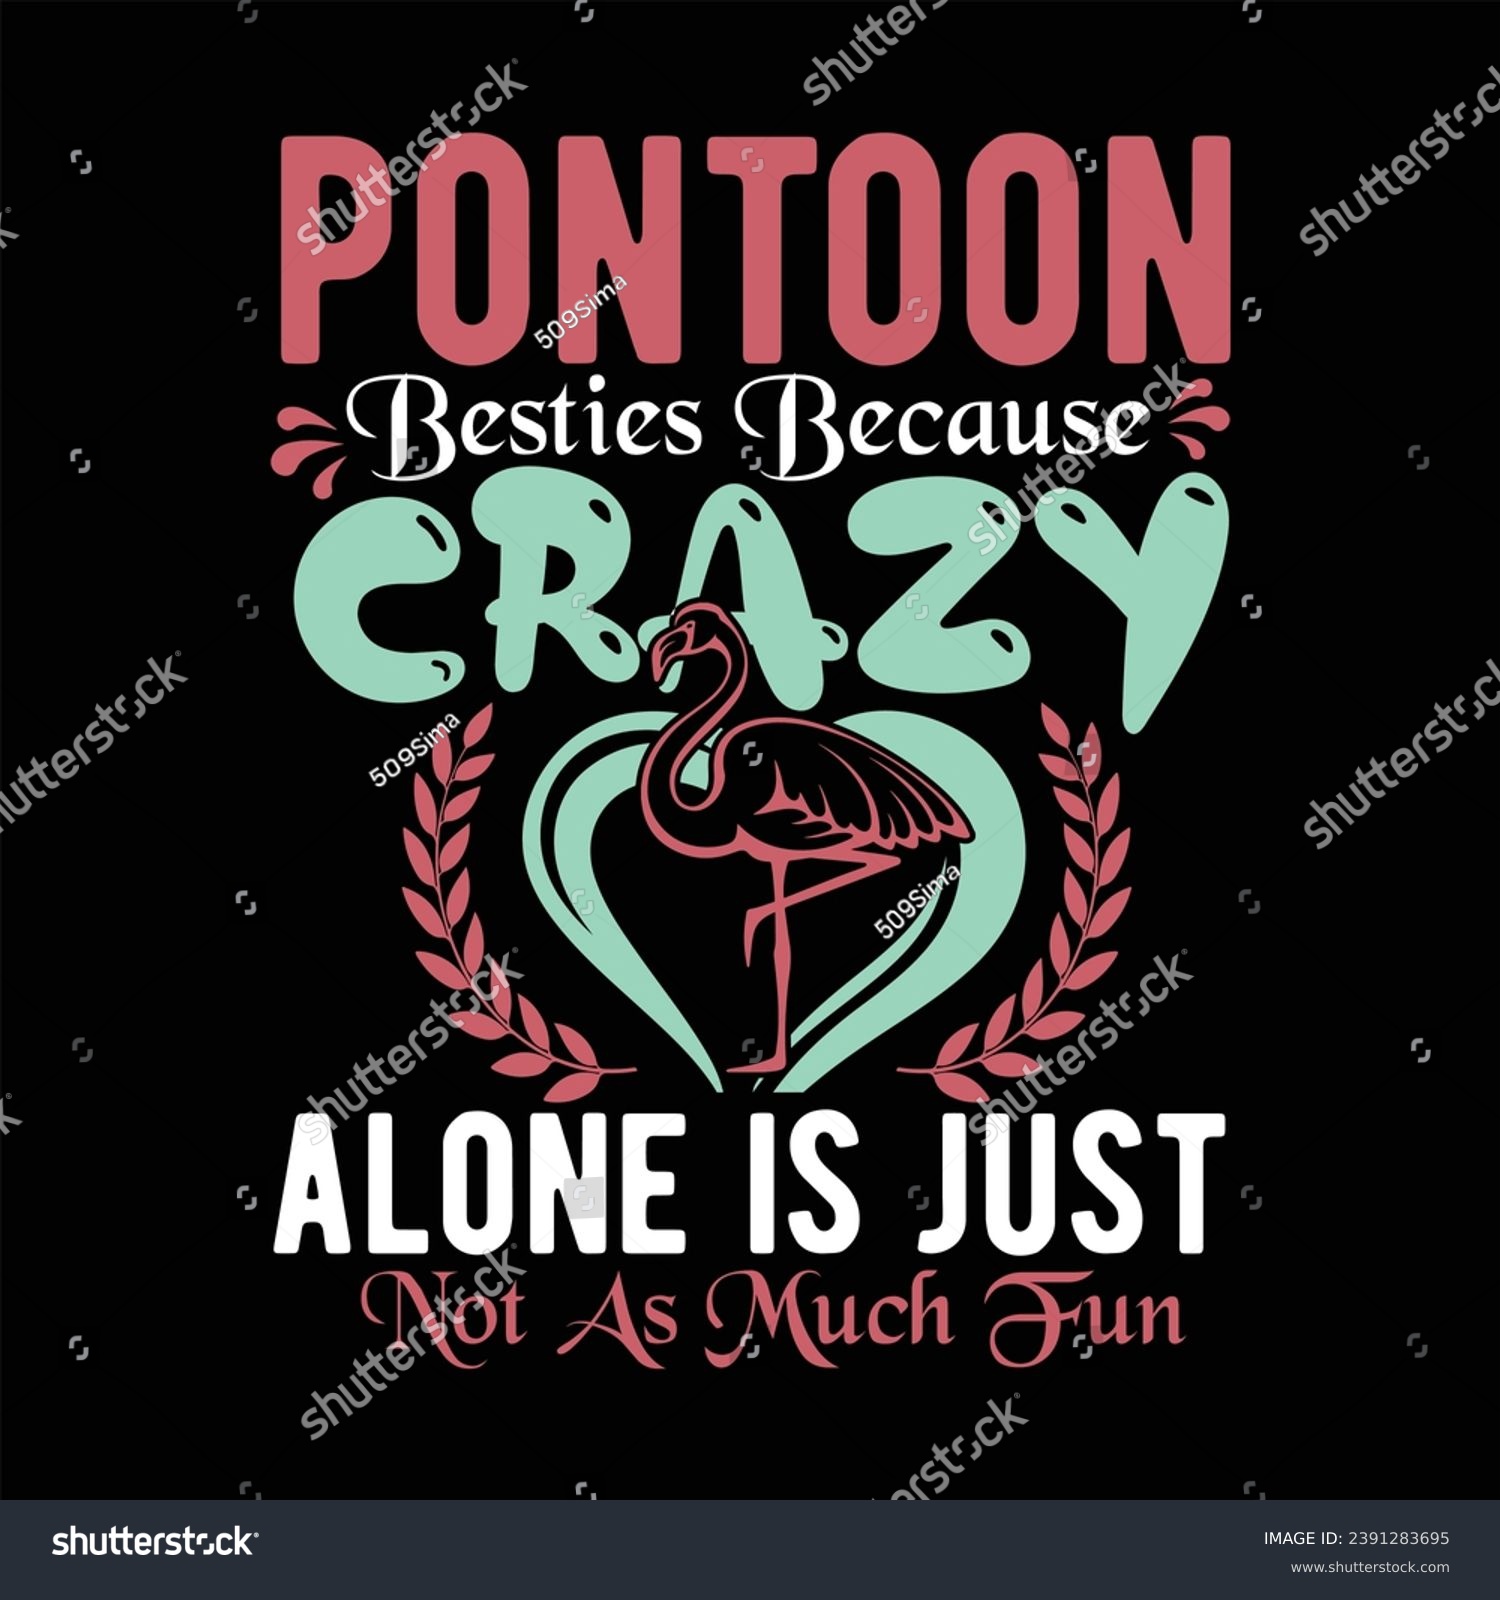 SVG of PONTOON BESTIES BECAUSE GOING CRAZY ALONE IS JUST NOT AS MUCH FUN-FLAMINGO T-SHIRT DESIGN svg